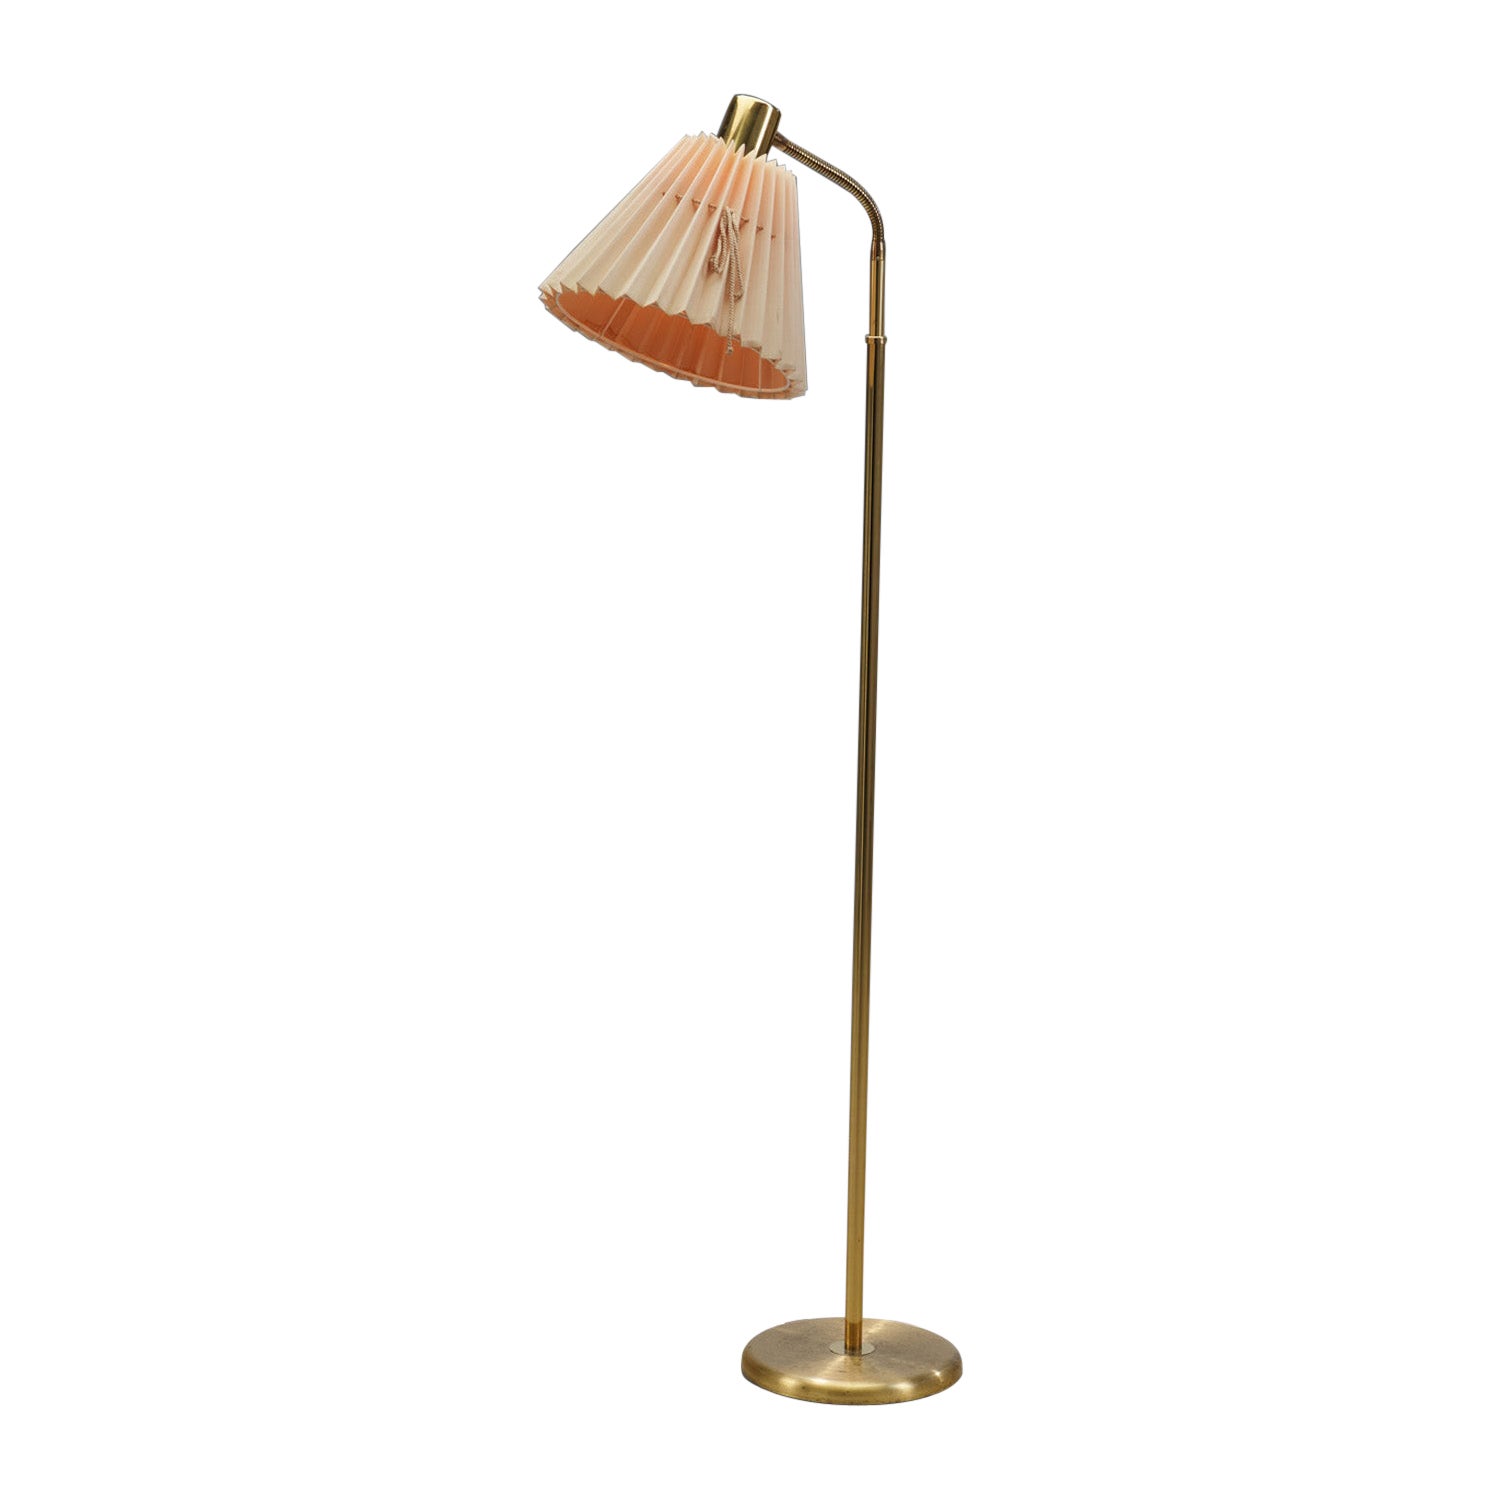 Boréns Model "7210" Brass Floor Lamp with Ruched Lampshade, Sweden 1960s For Sale